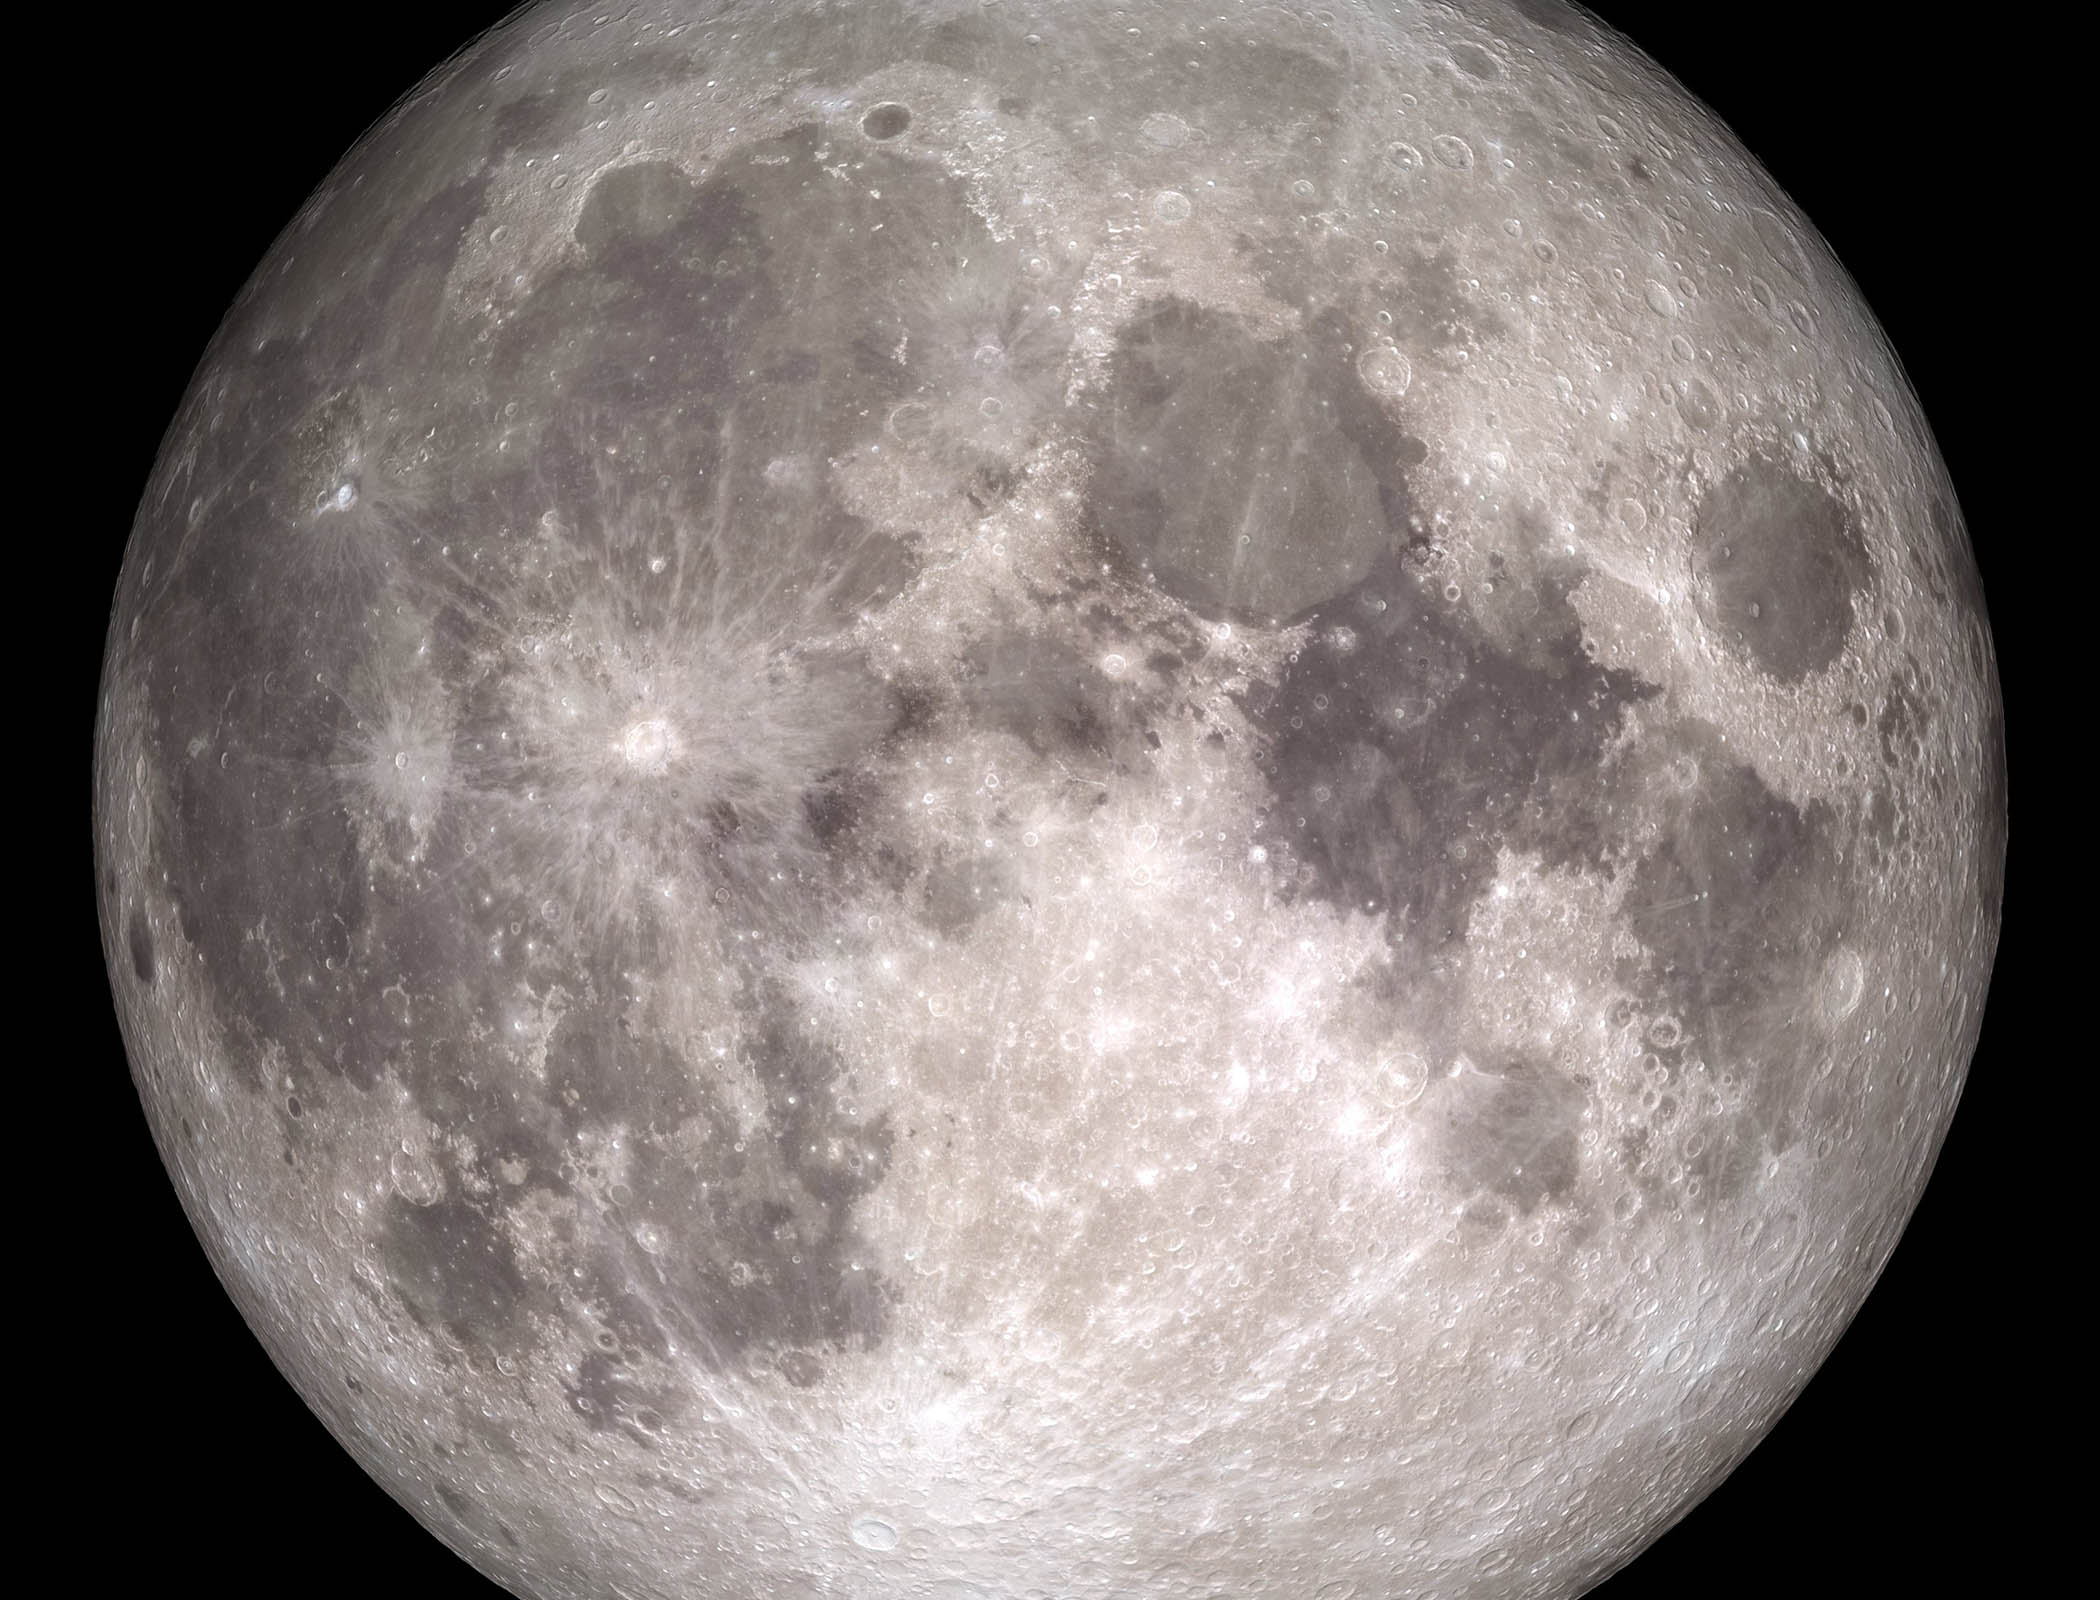 Humans could be living on the Moon by 2030, Nasa says